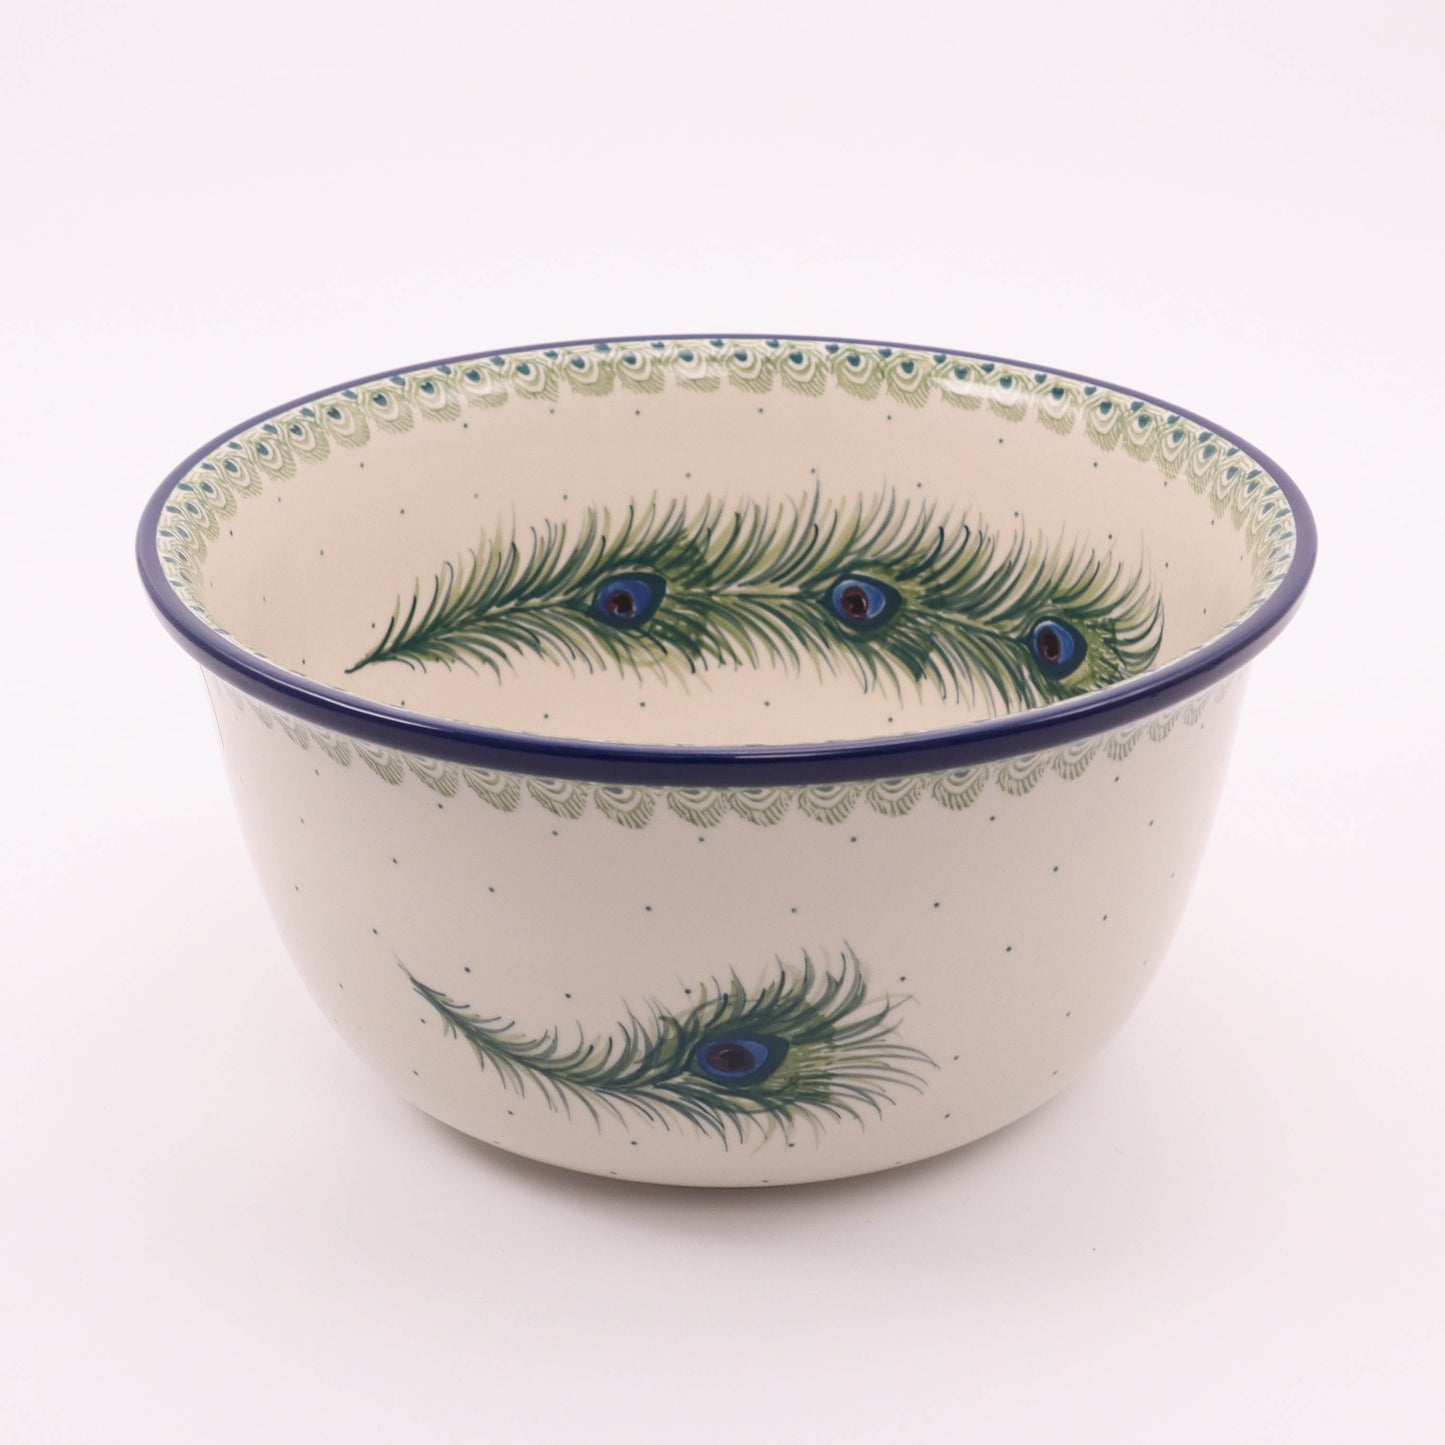 10.5"x5" Bowl. Pattern: Peacock Feathers